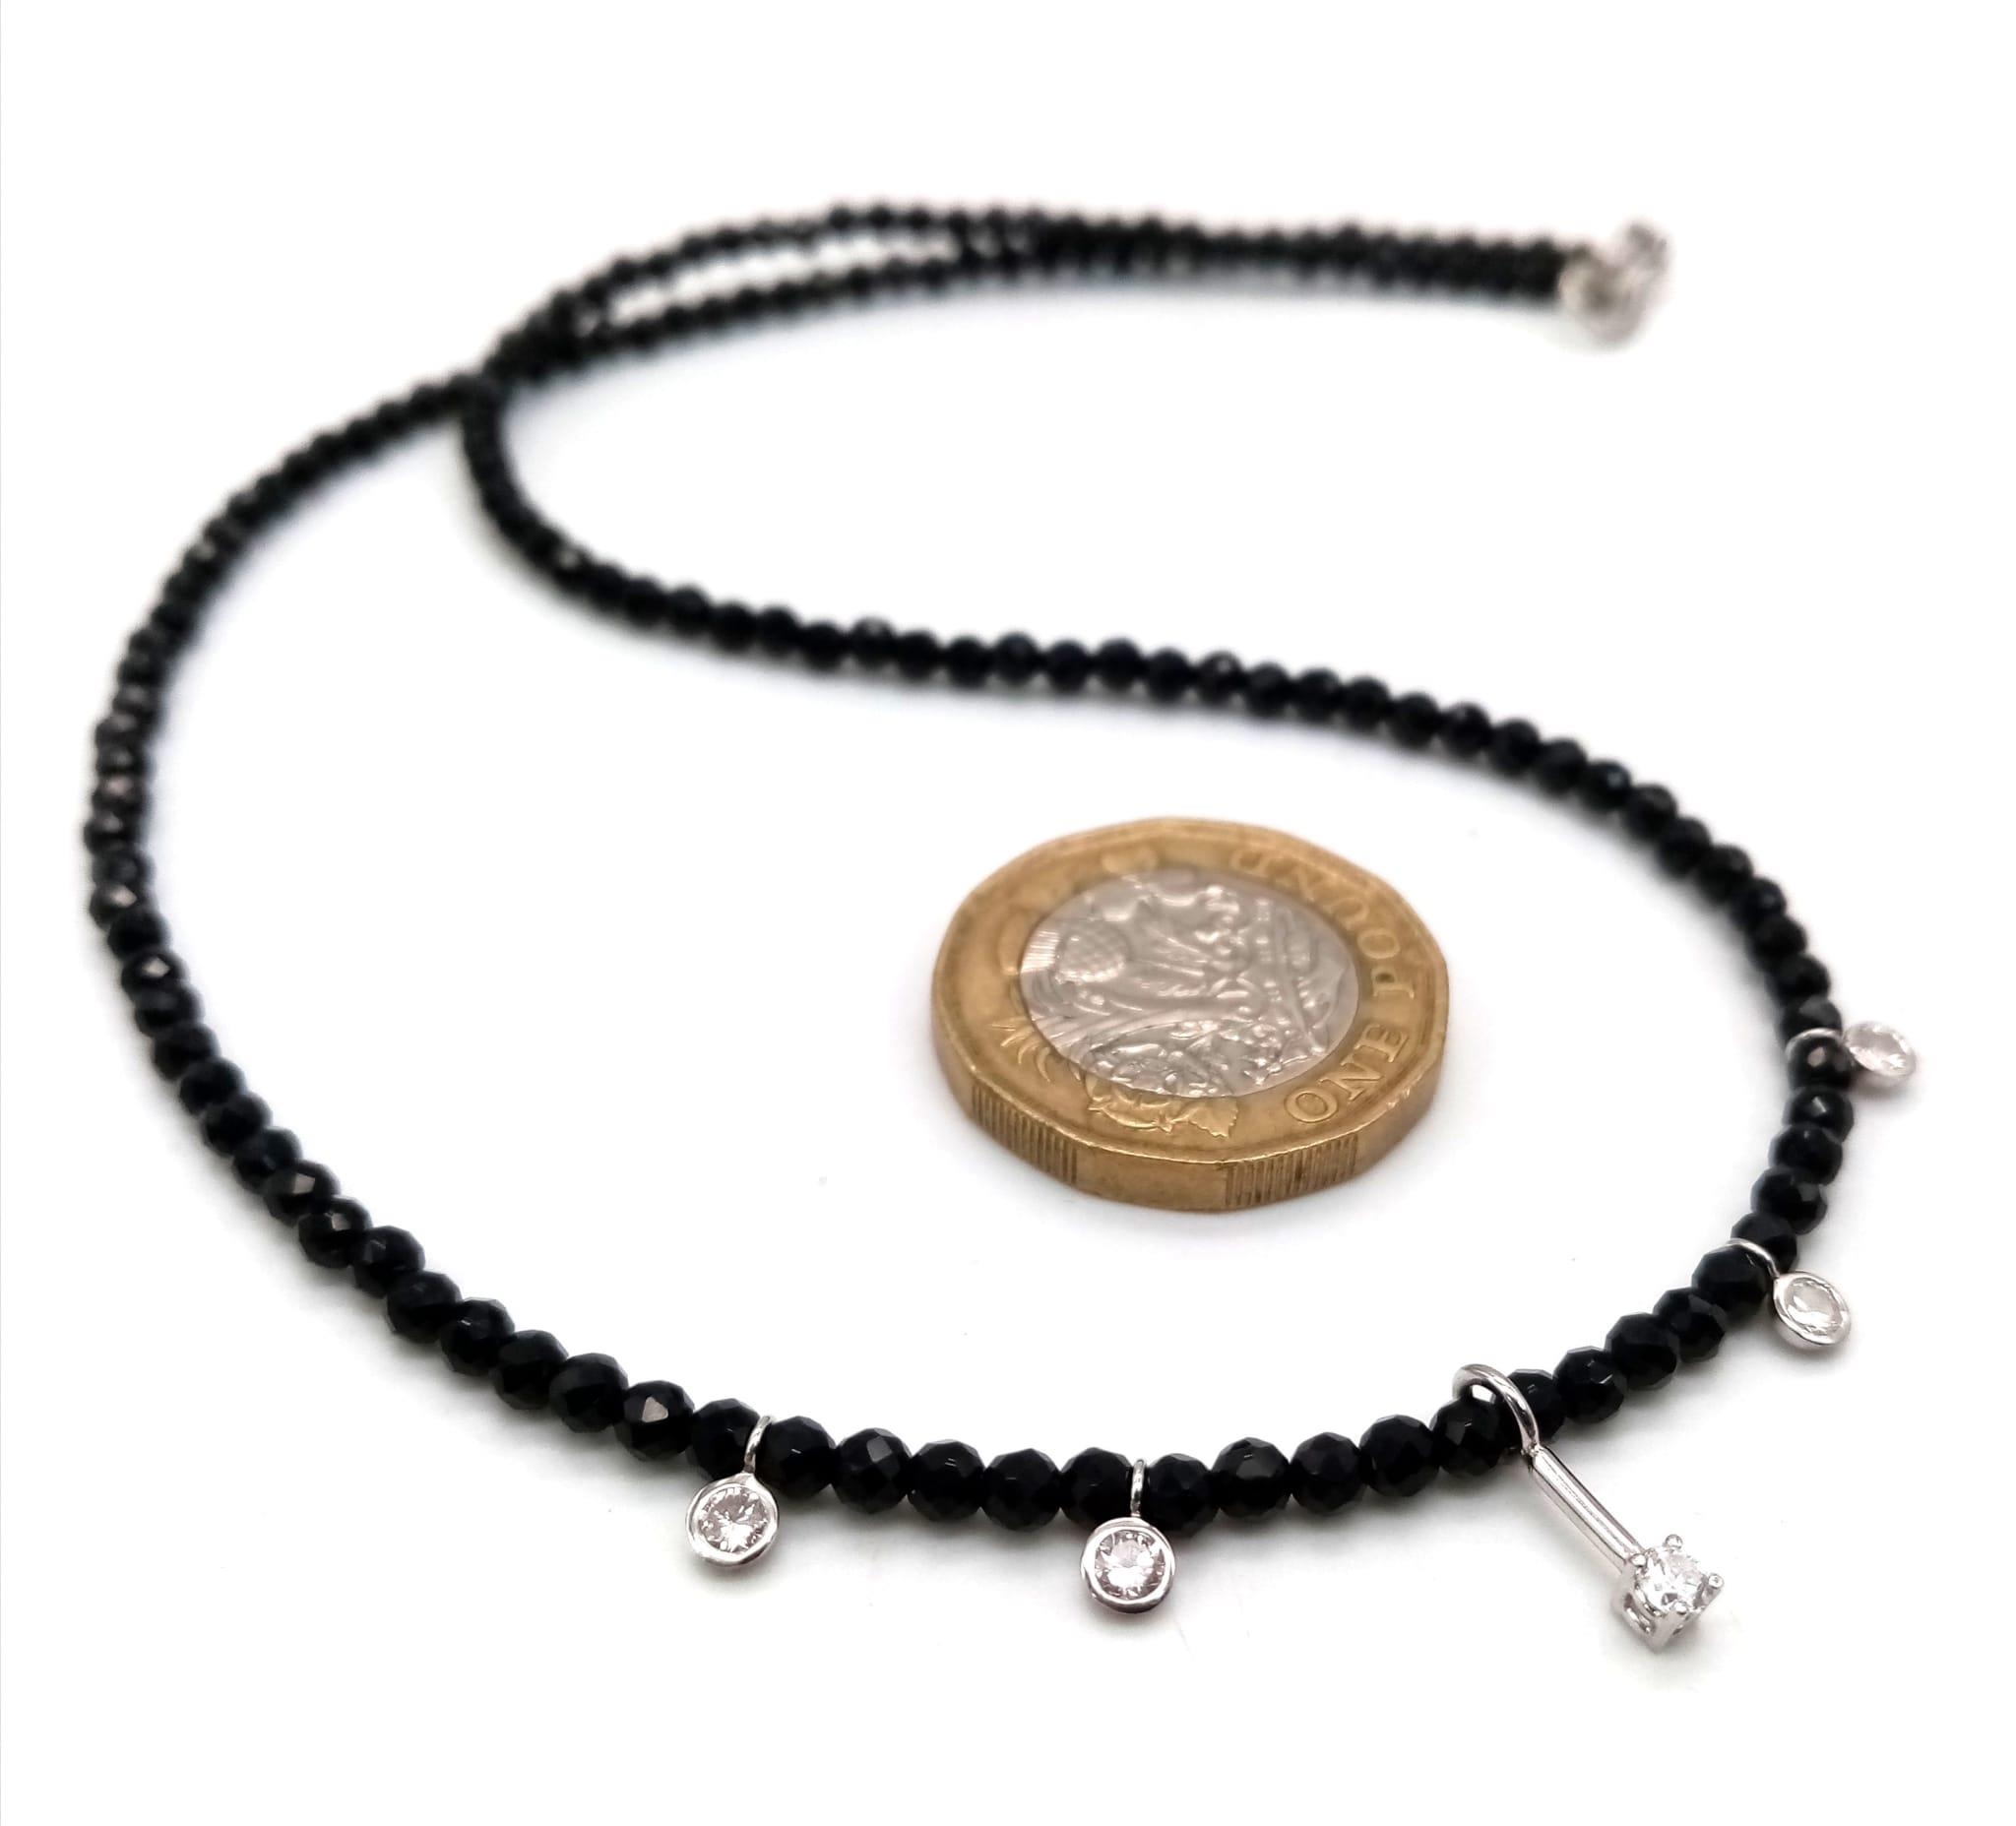 A Black Spinel Small Bead Necklace with Five Stone White Diamond Decoration. 0.5ctw. 14k gold clasp. - Image 4 of 5